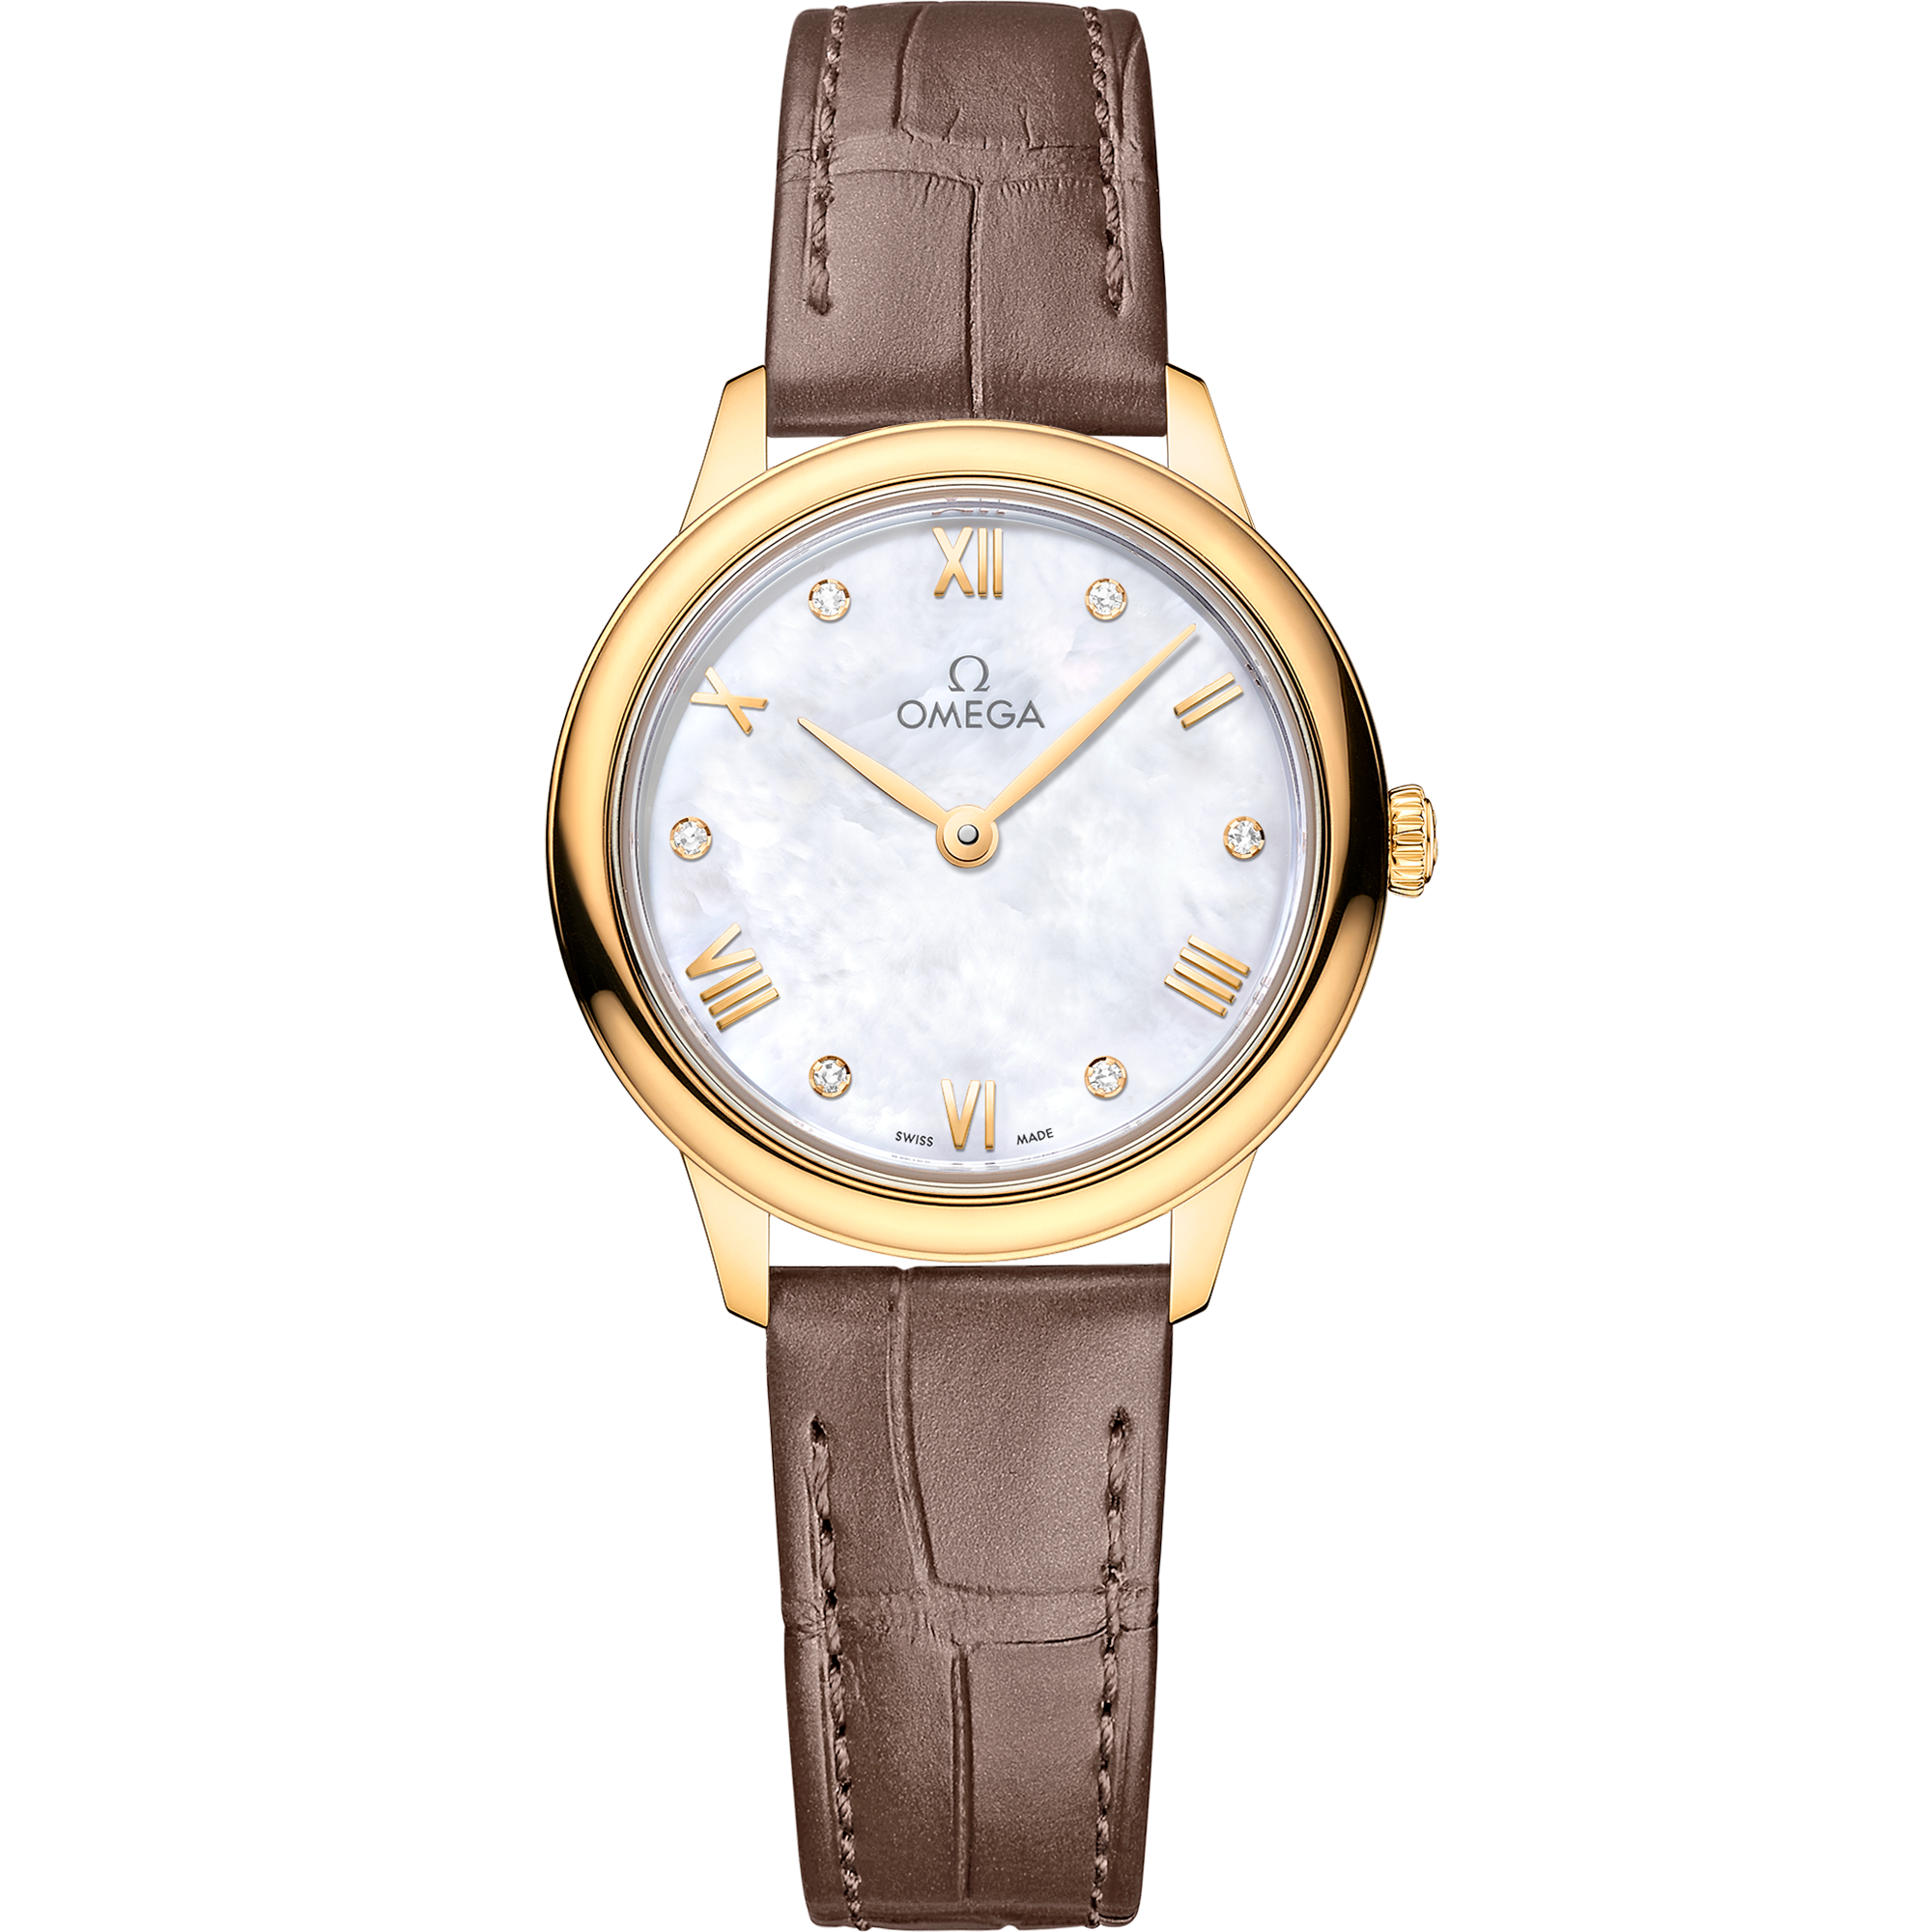 De Ville 27.5 mm, yellow gold on leather strap - 434.53.28.60.55.002